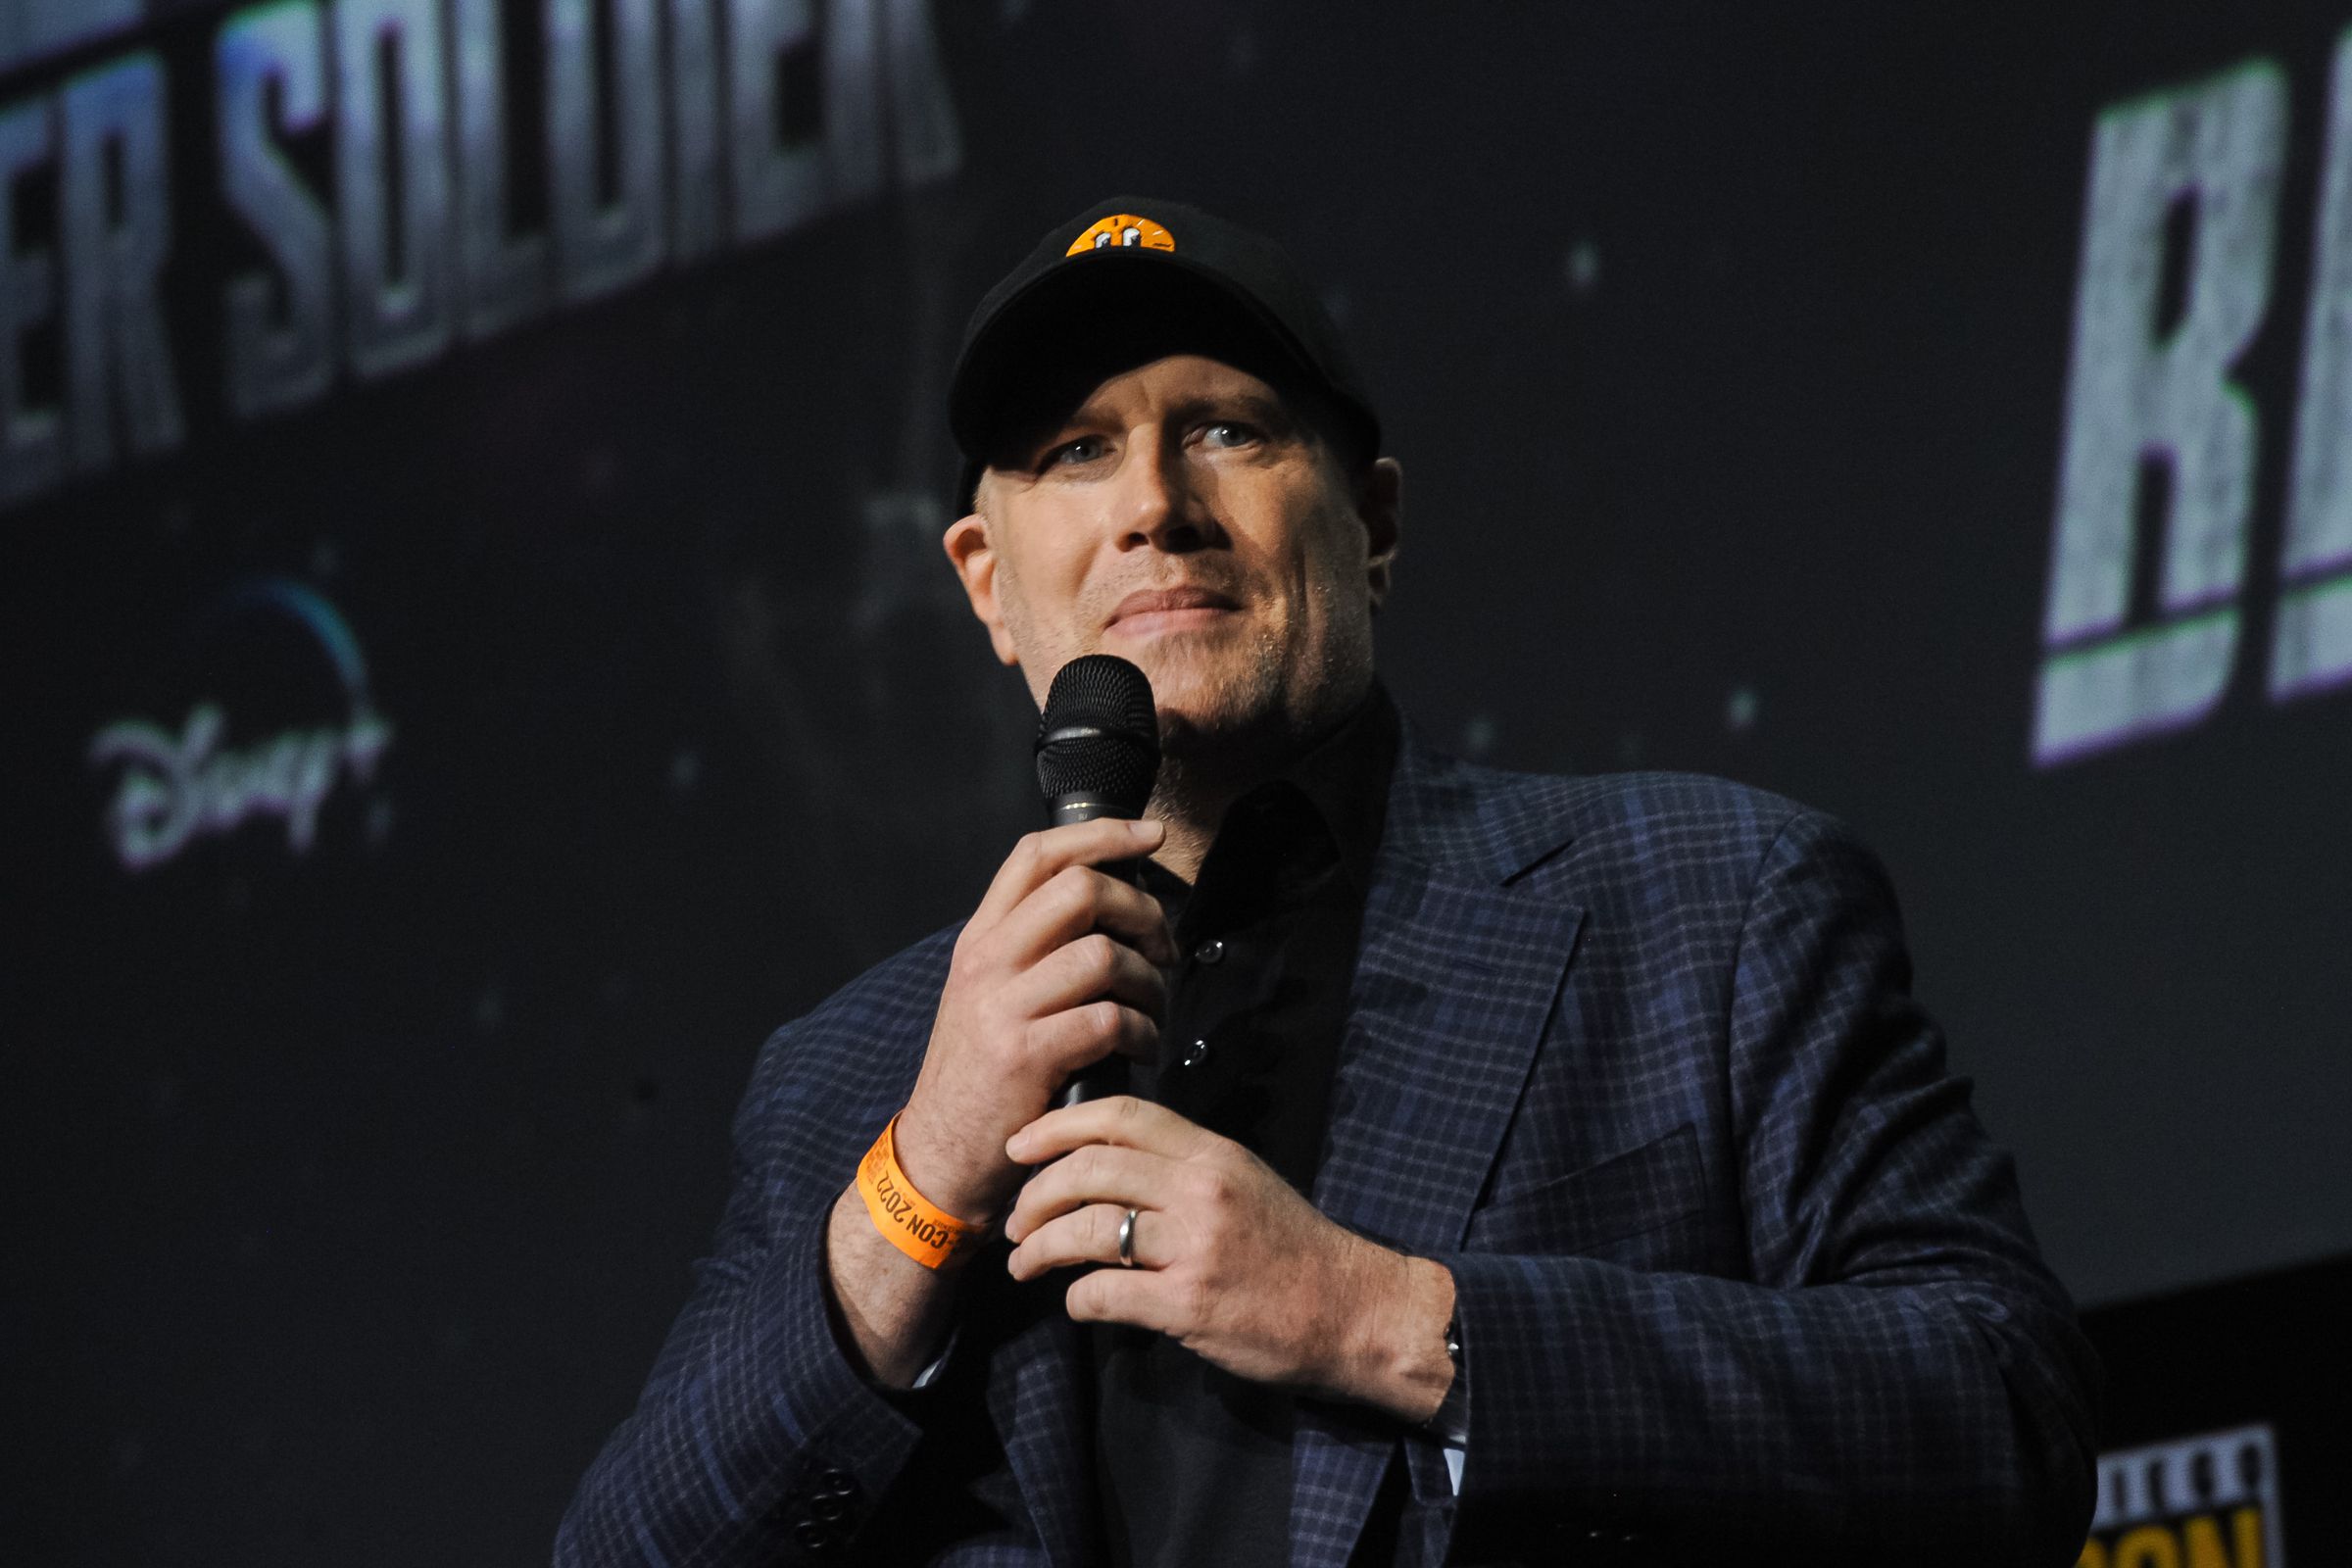 An image showing Kevin Feige at the 2022 Comic-Con in San Diego